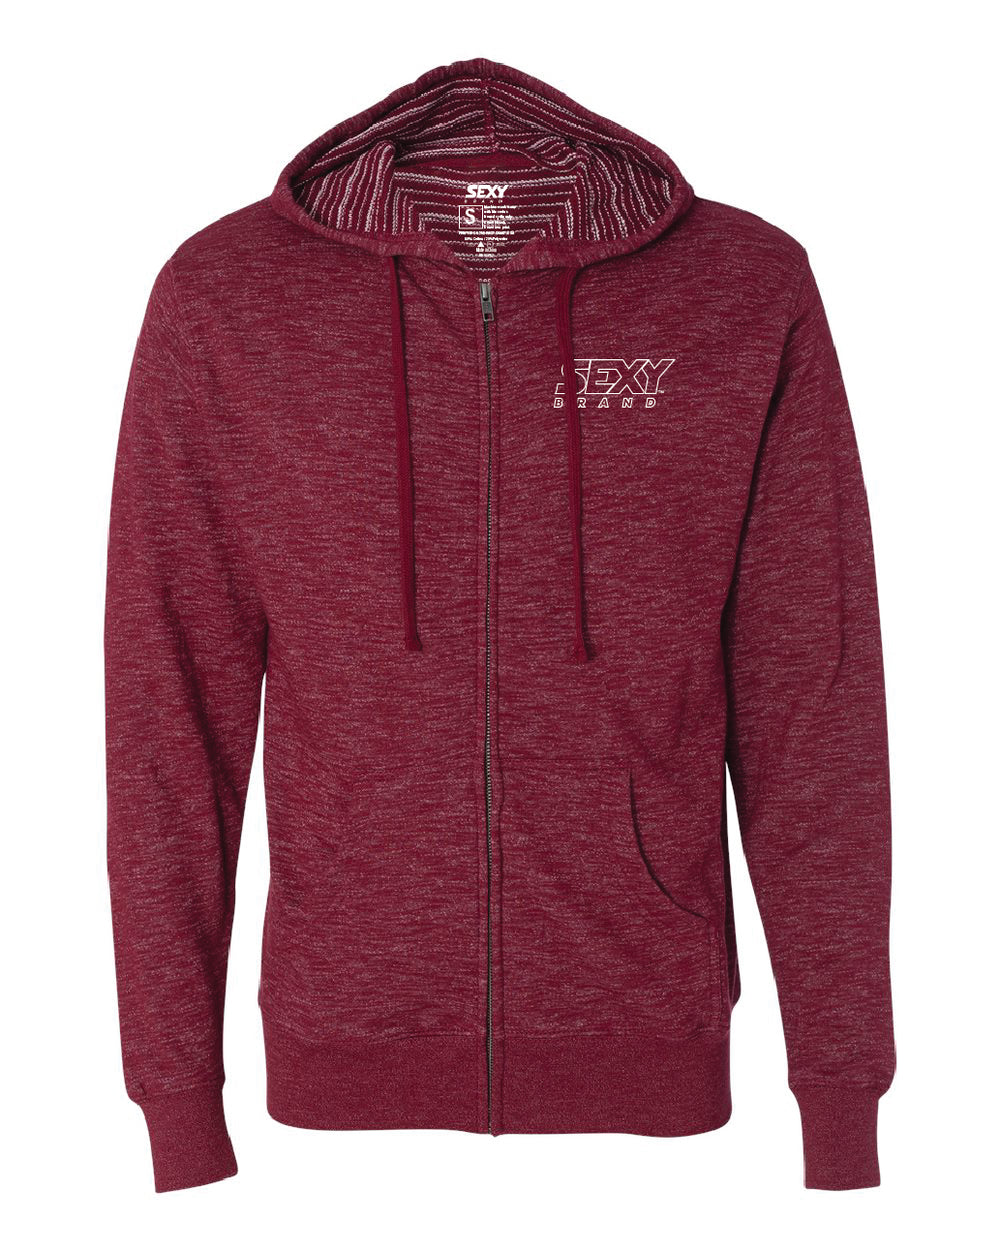 Men's South Of The Border Zip-Up Hoodie in Rojo Cardenal